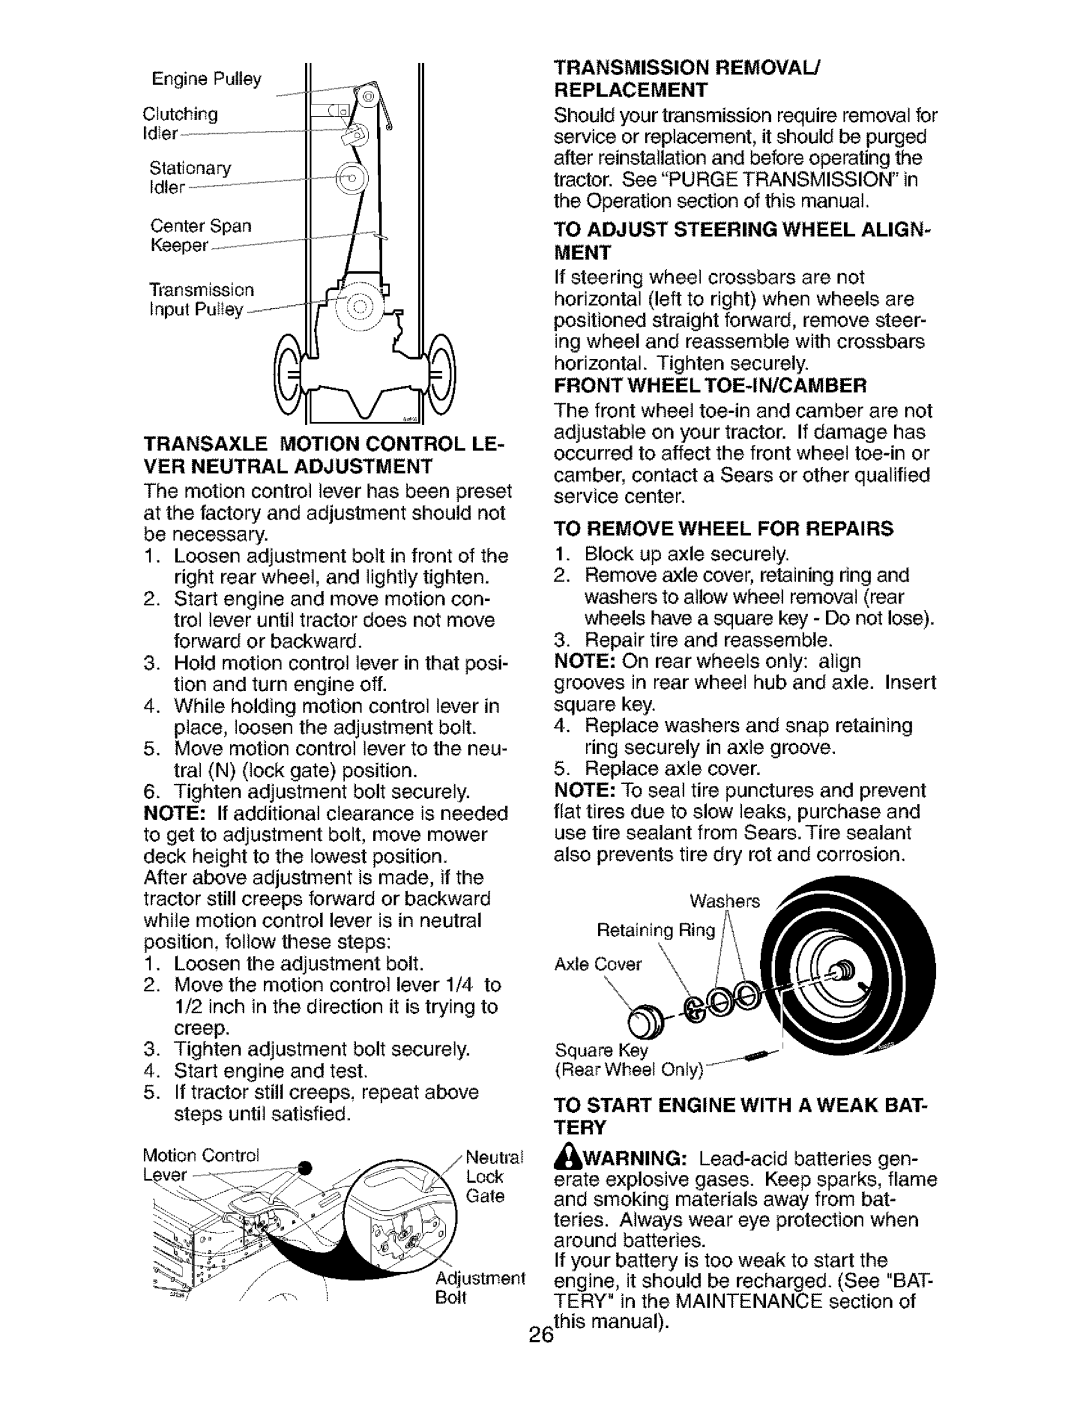 Craftsman 917.273823 owner manual To Start Engine With A Weak Bat Tery, 26this manual, Transmission Removal Replacement 